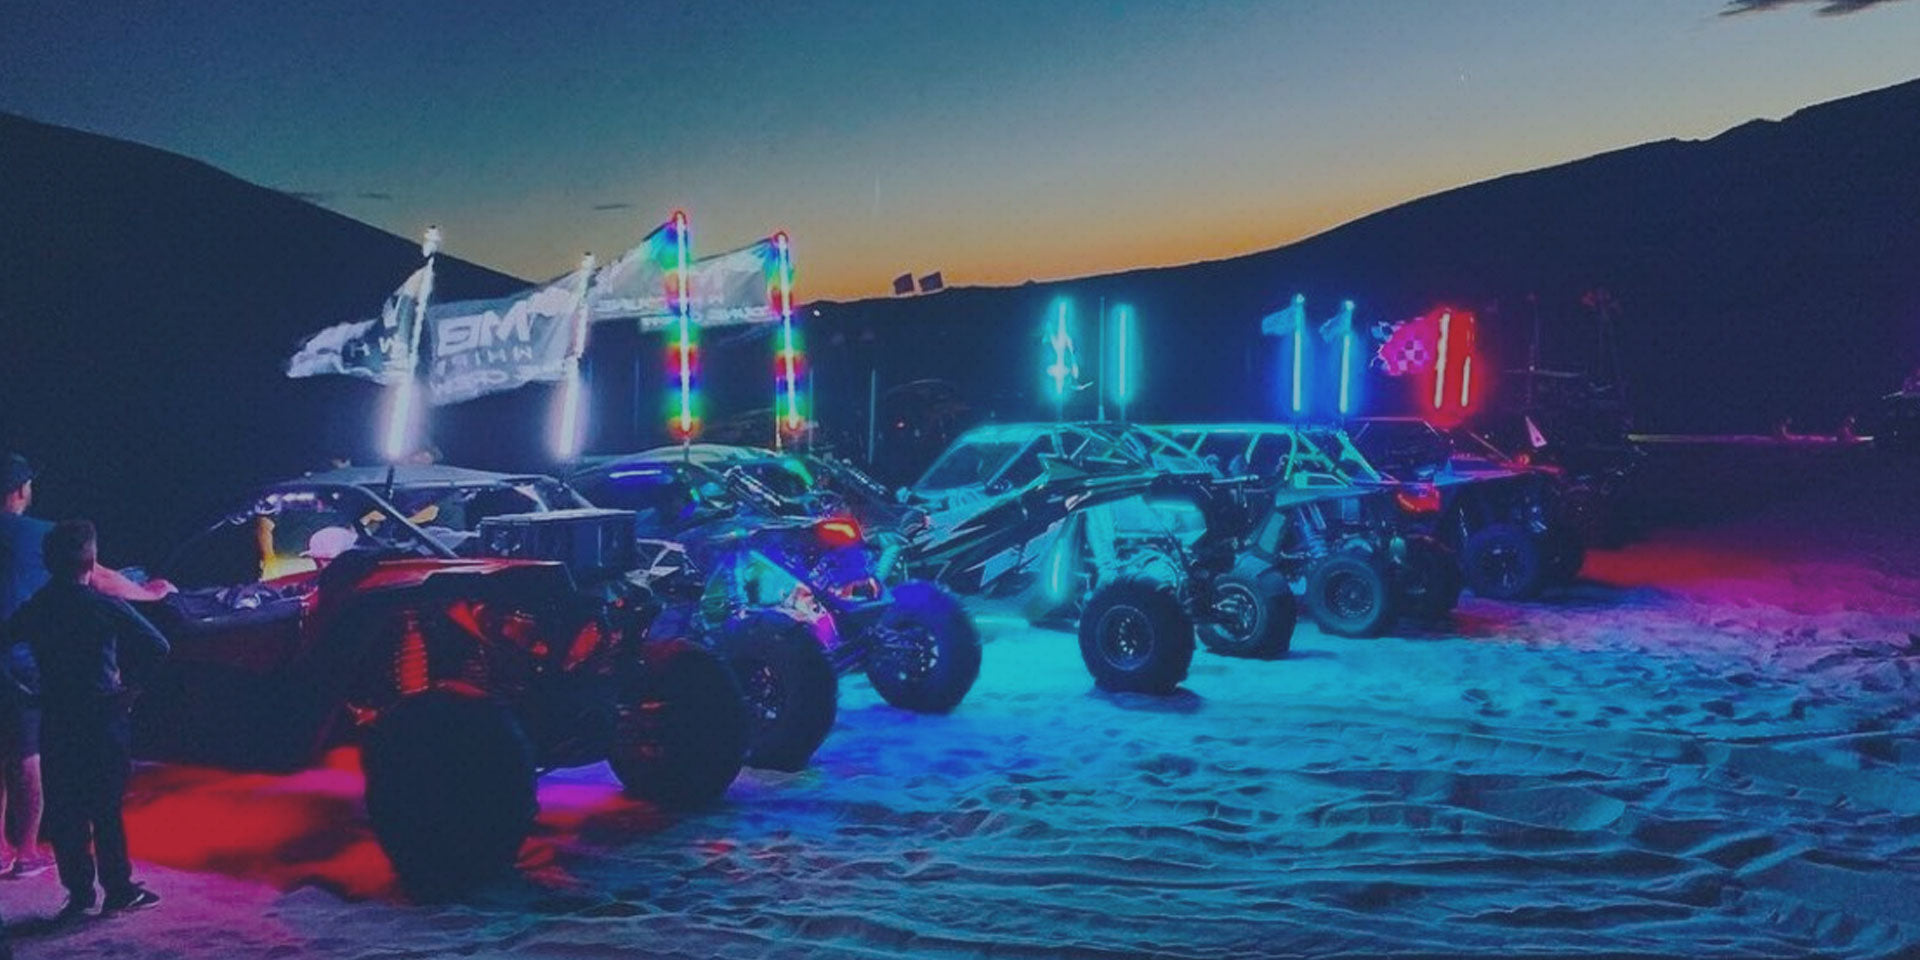 UTV's at the sand dunes with MB Whips LED lighted flags. 